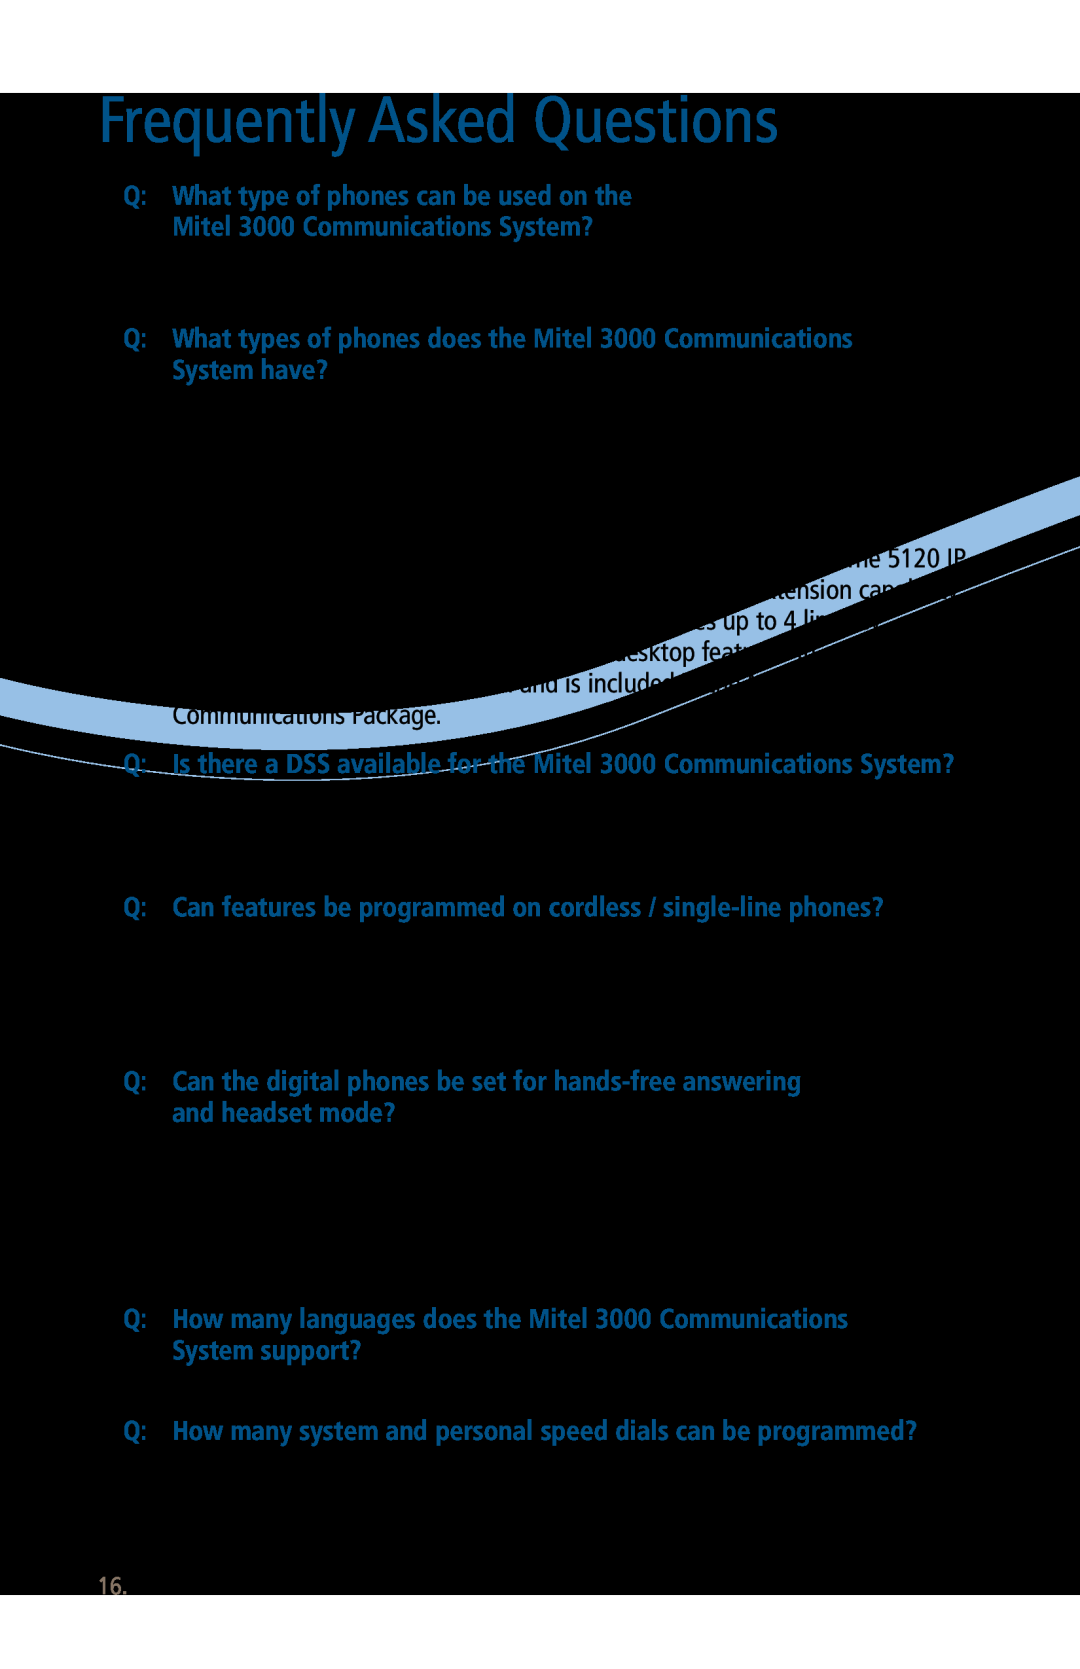 Mitel manual Frequently Asked Questions, Q Is there a DSS available for the Mitel 3000 Communications System? 